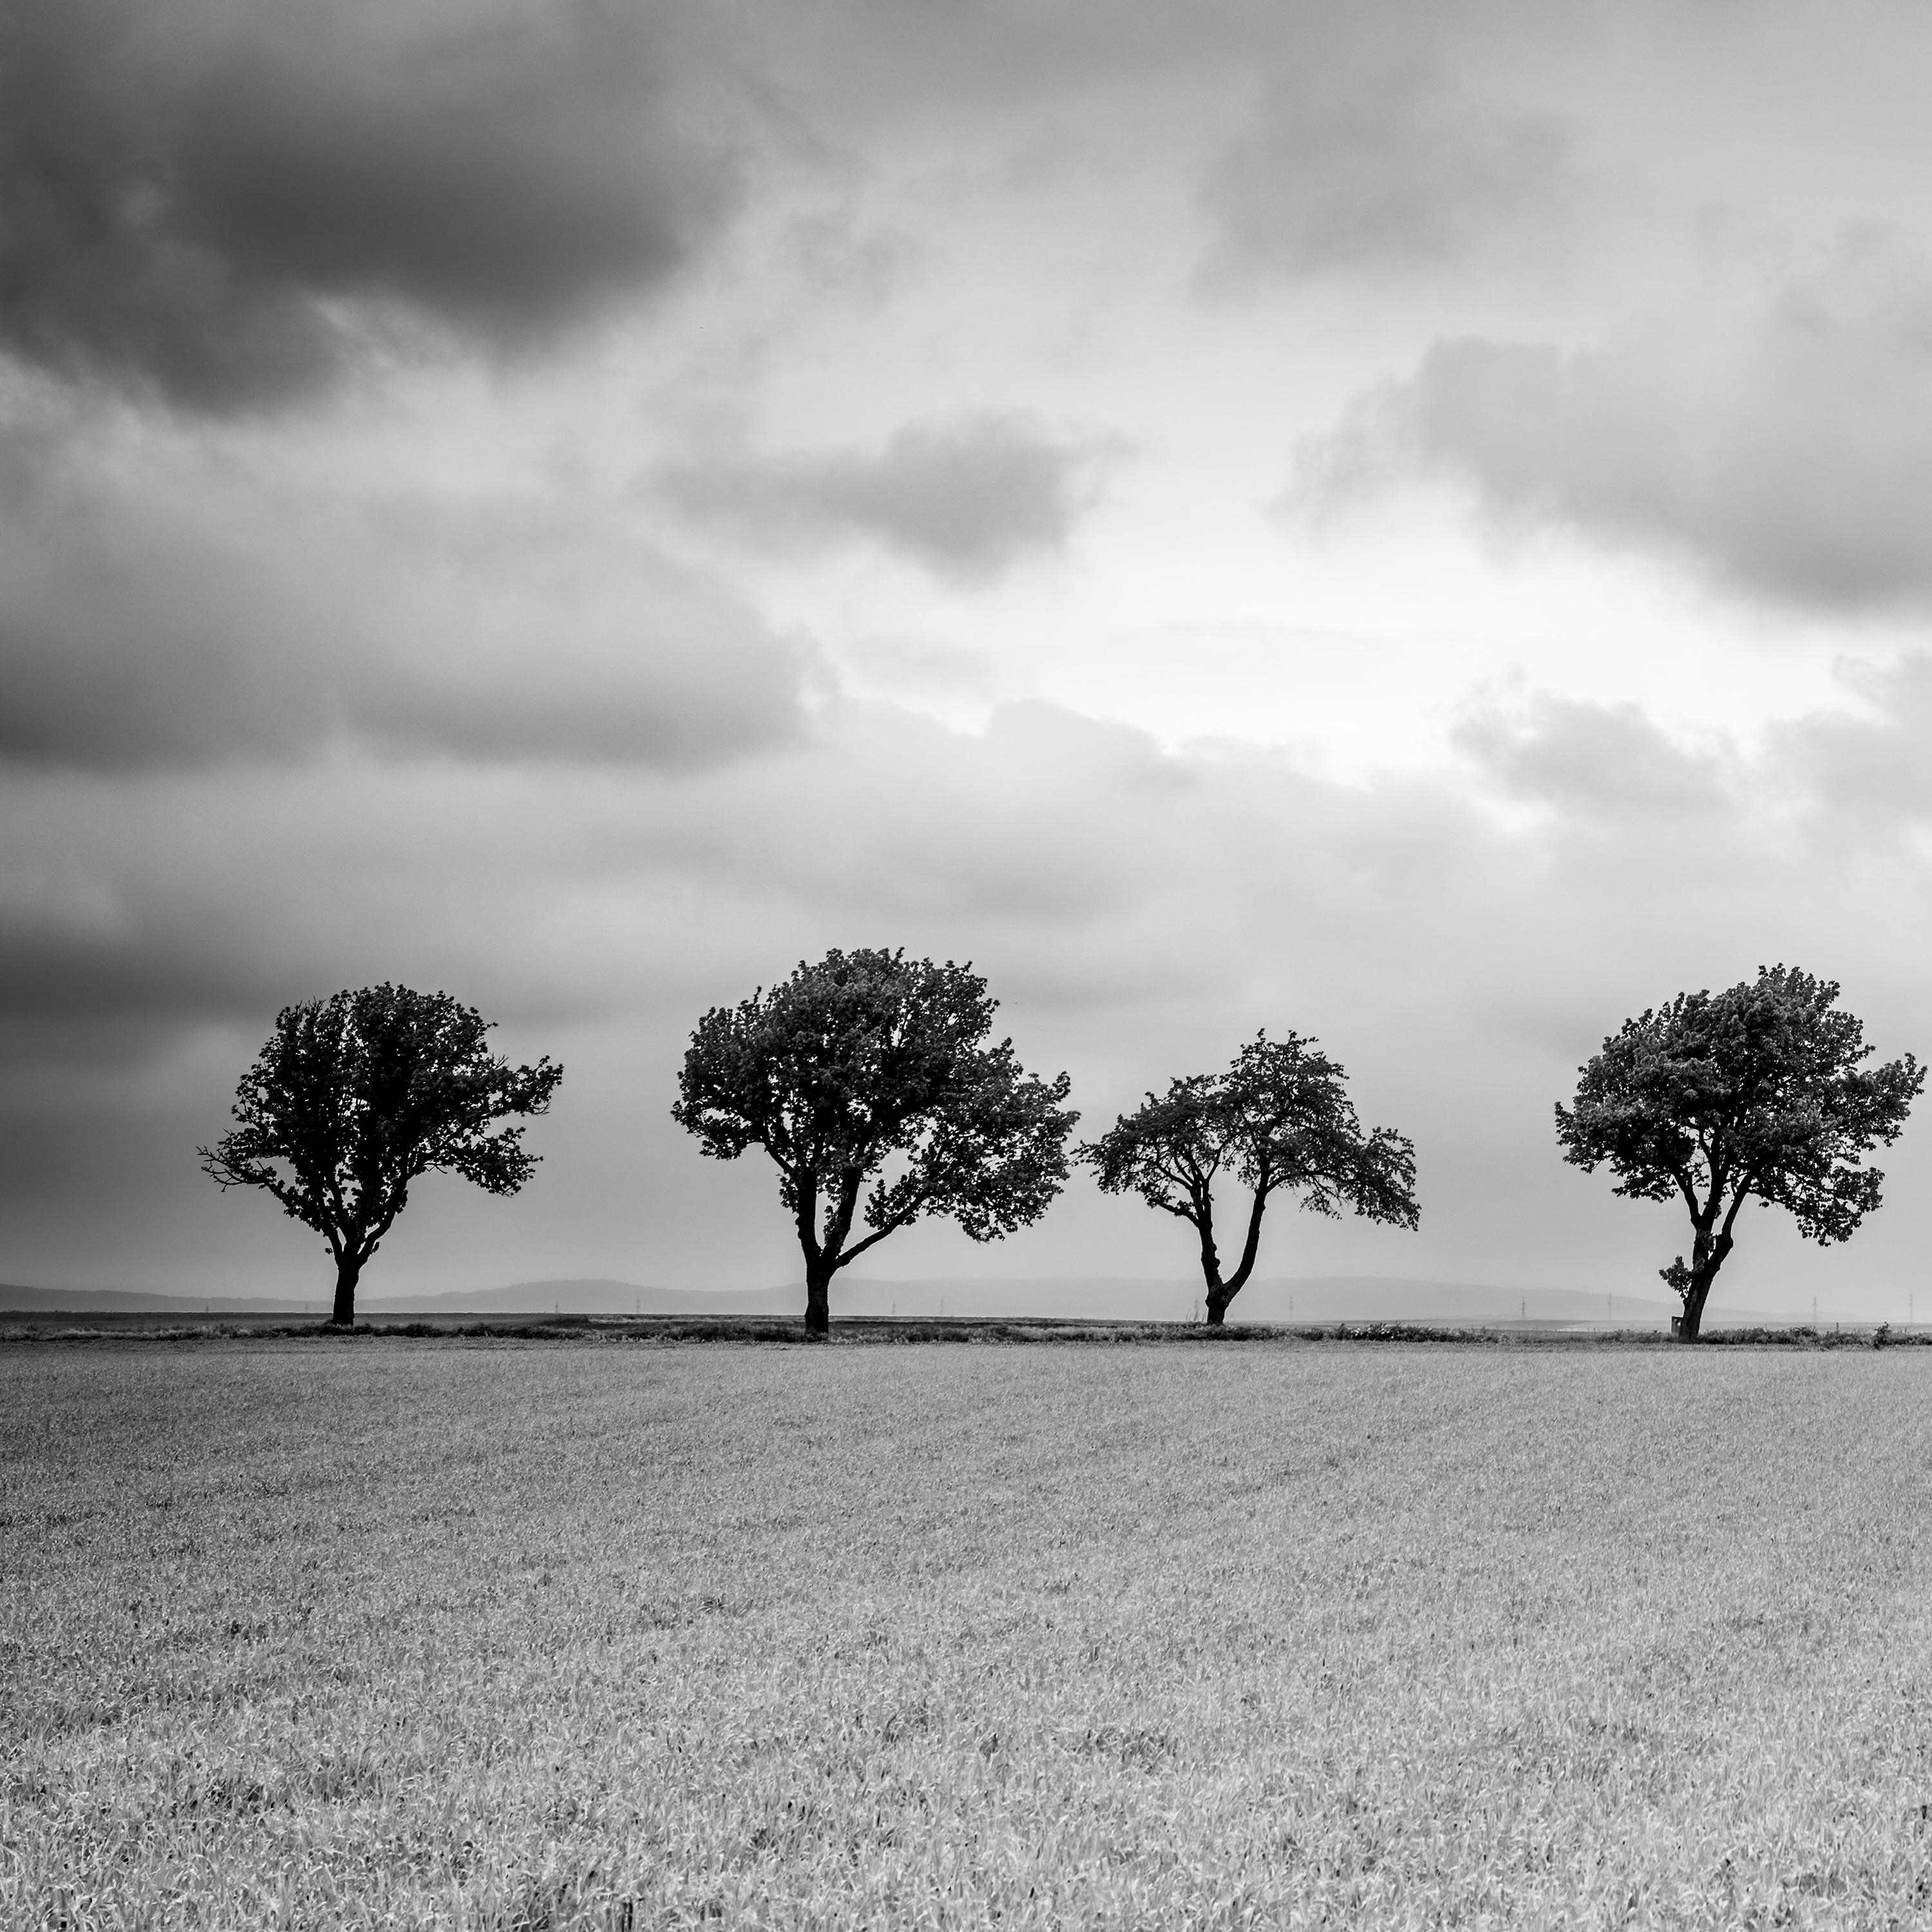 Trees on the edge of Field, cloudy, storm, black white art landscape photography For Sale 1